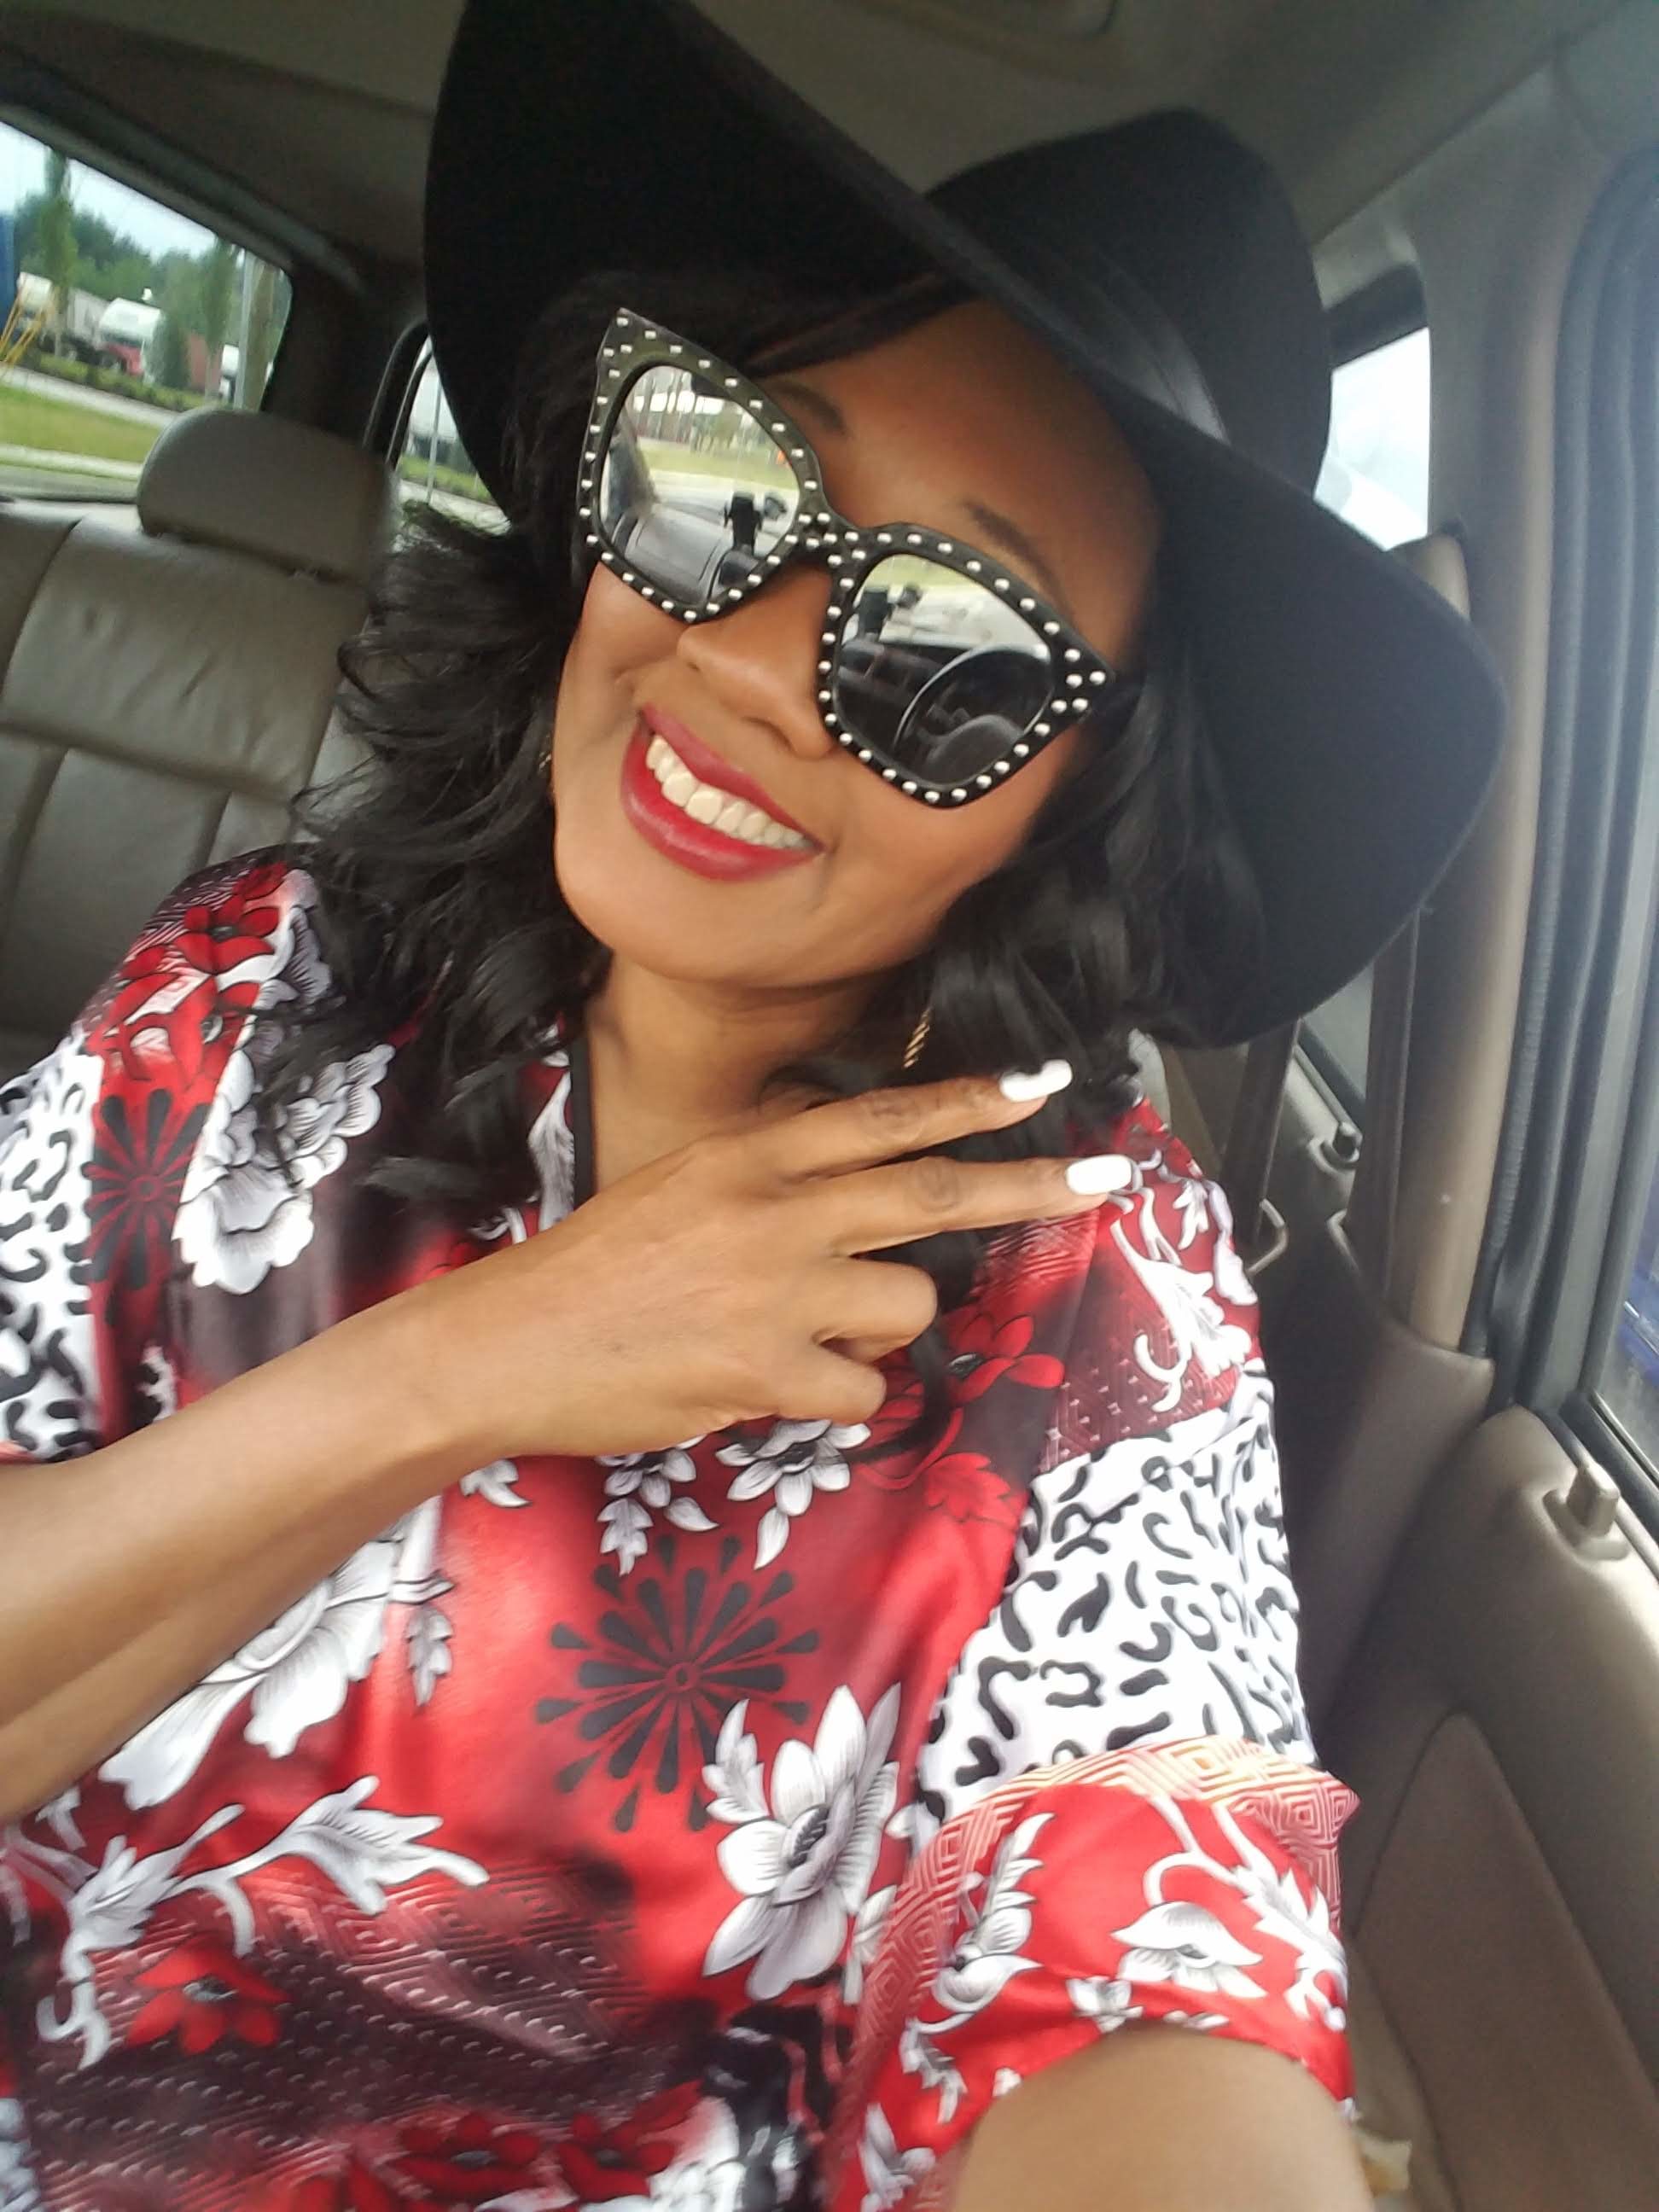 A black woman sitting in a car, wearing sunglasses and a black cowboy style hat and a red, white and black floral caftan.